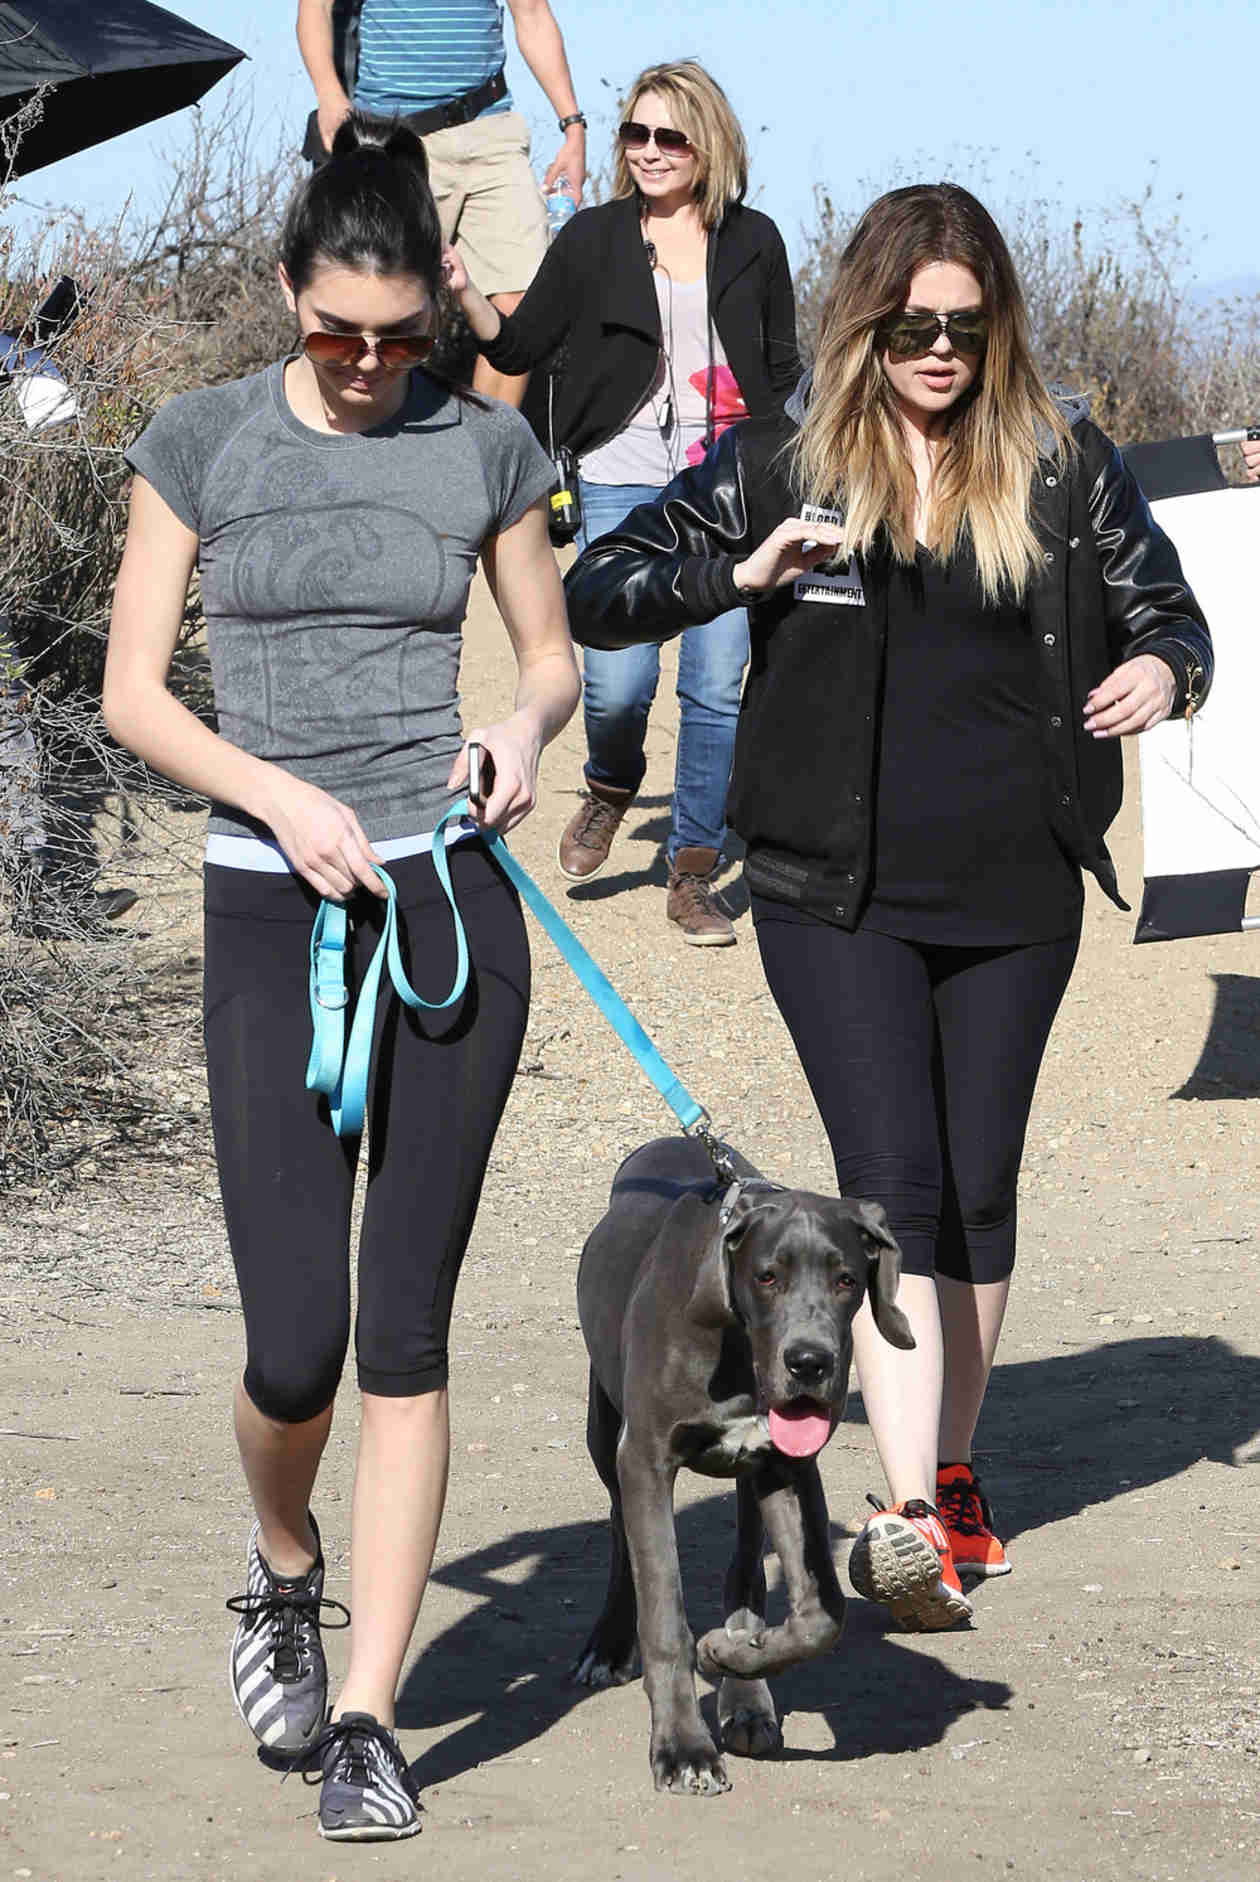 Kendall Jenner walking down the mountain with her Great Dane Puppy